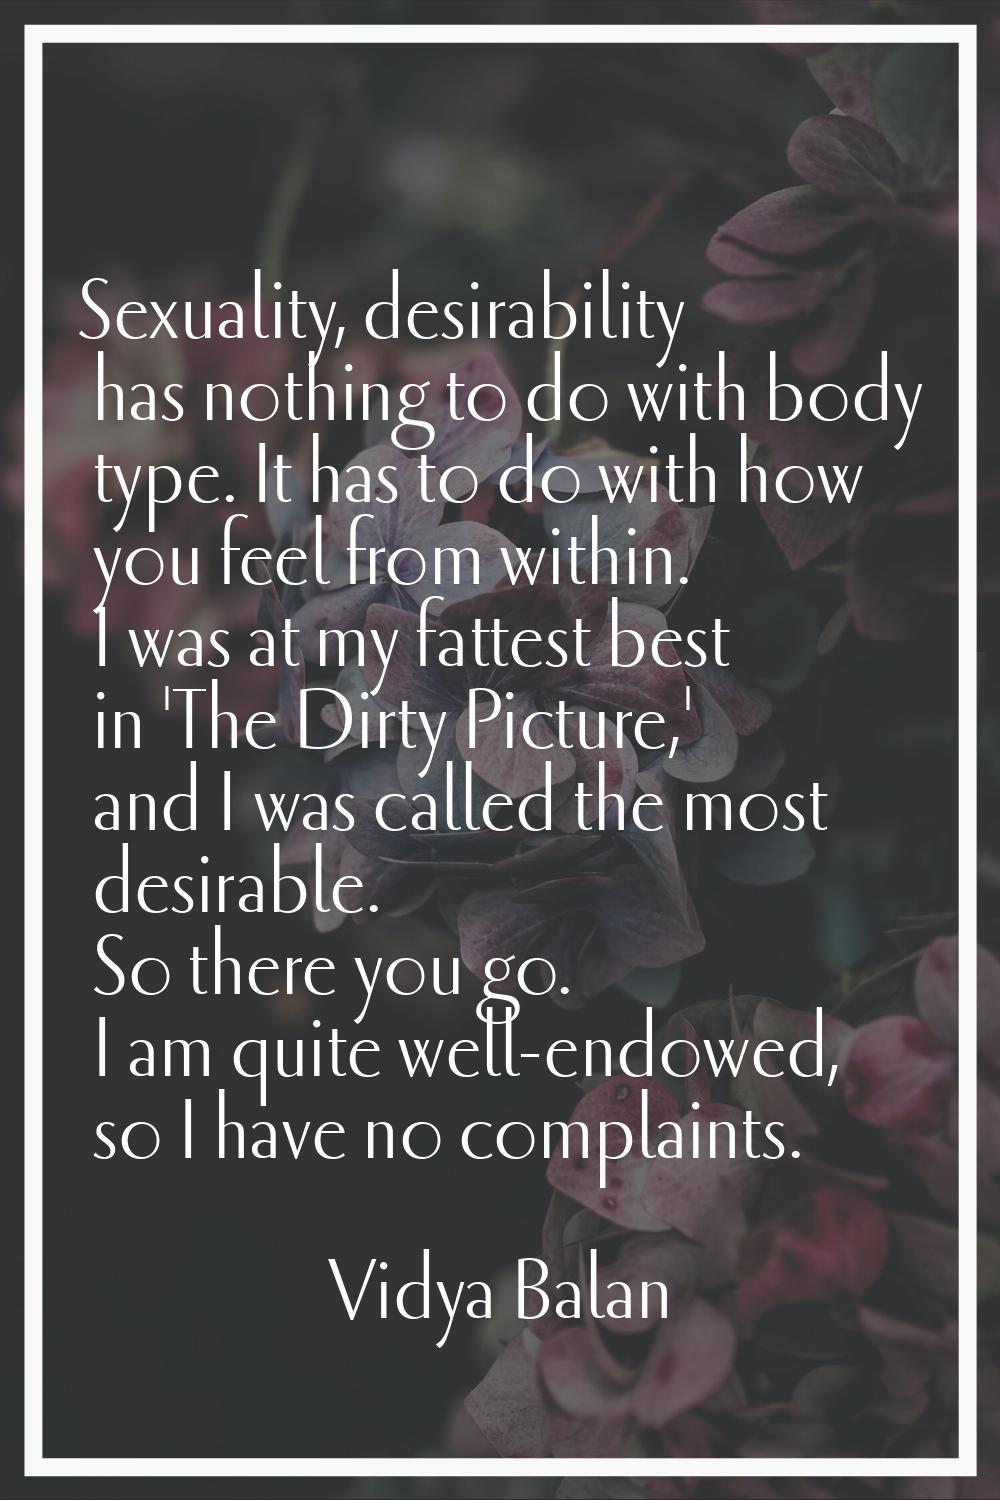 Sexuality, desirability has nothing to do with body type. It has to do with how you feel from withi